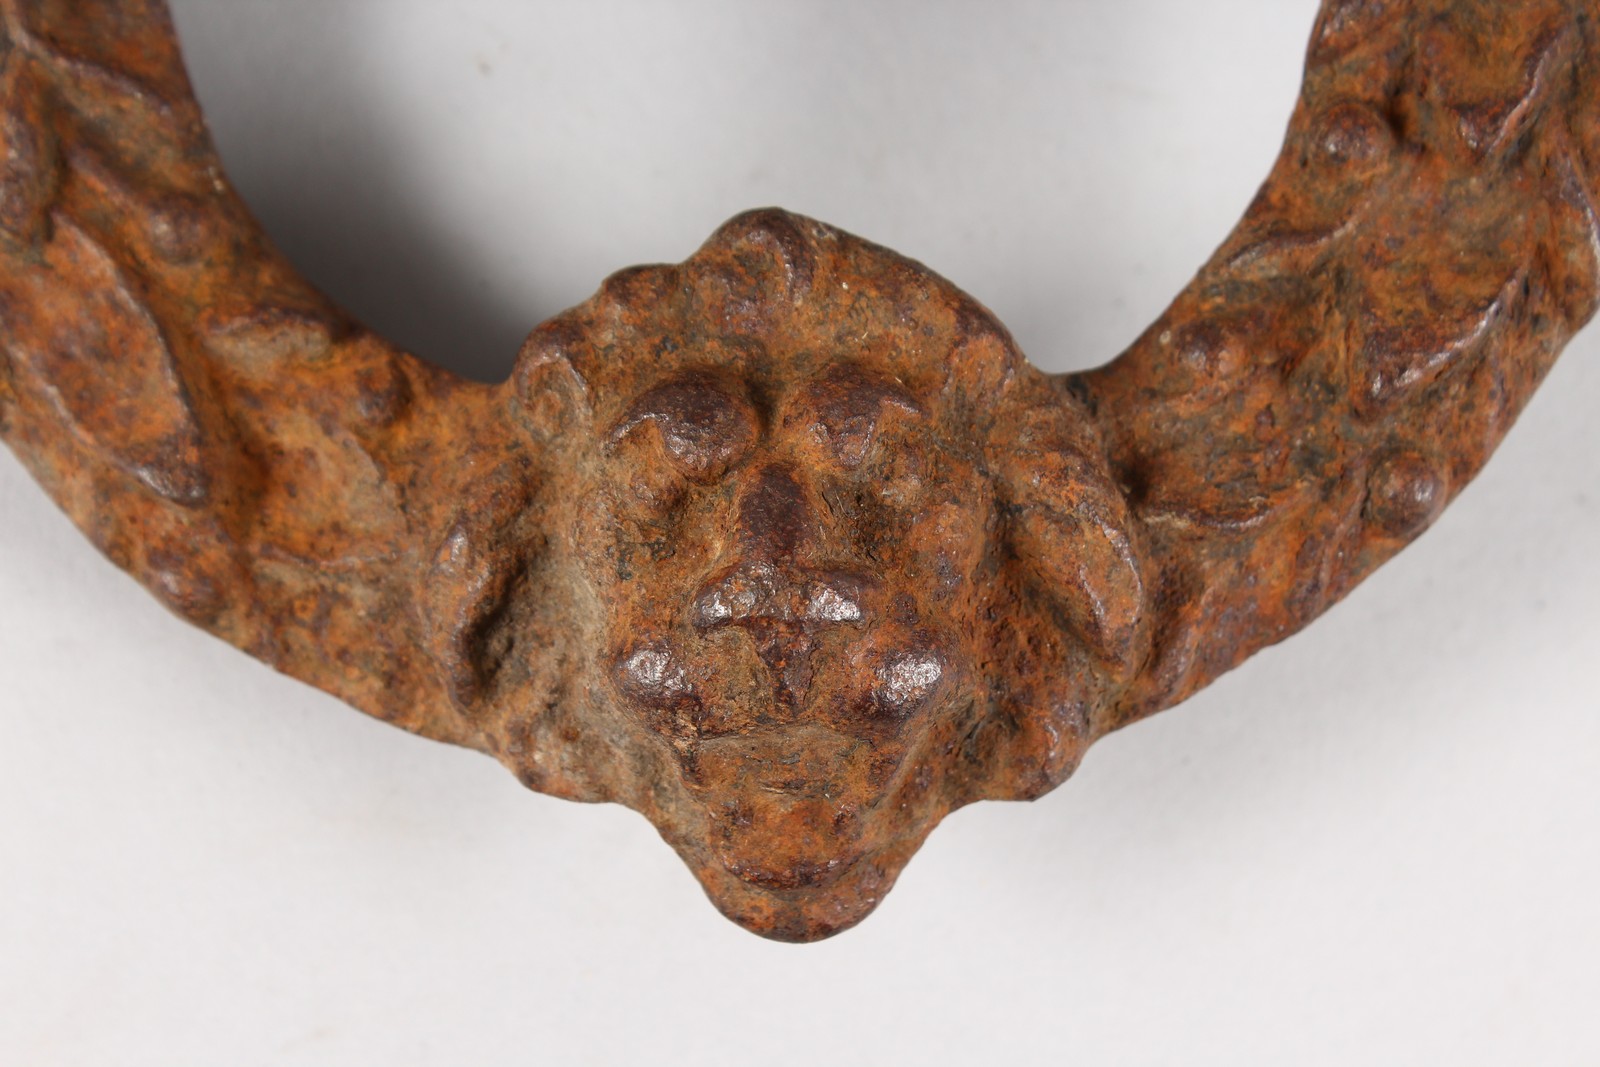 A CAST IRON CLENCHED FIST DOOR KNOCKER. - Image 2 of 3